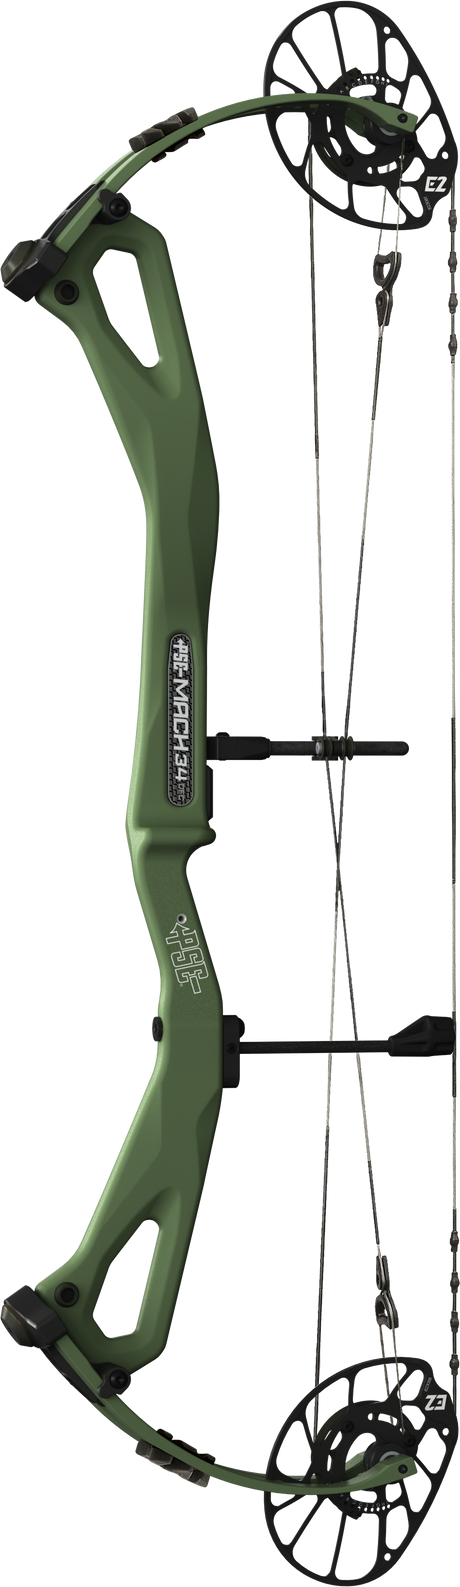 PSE Mach 34 Carbon Bow Green Color